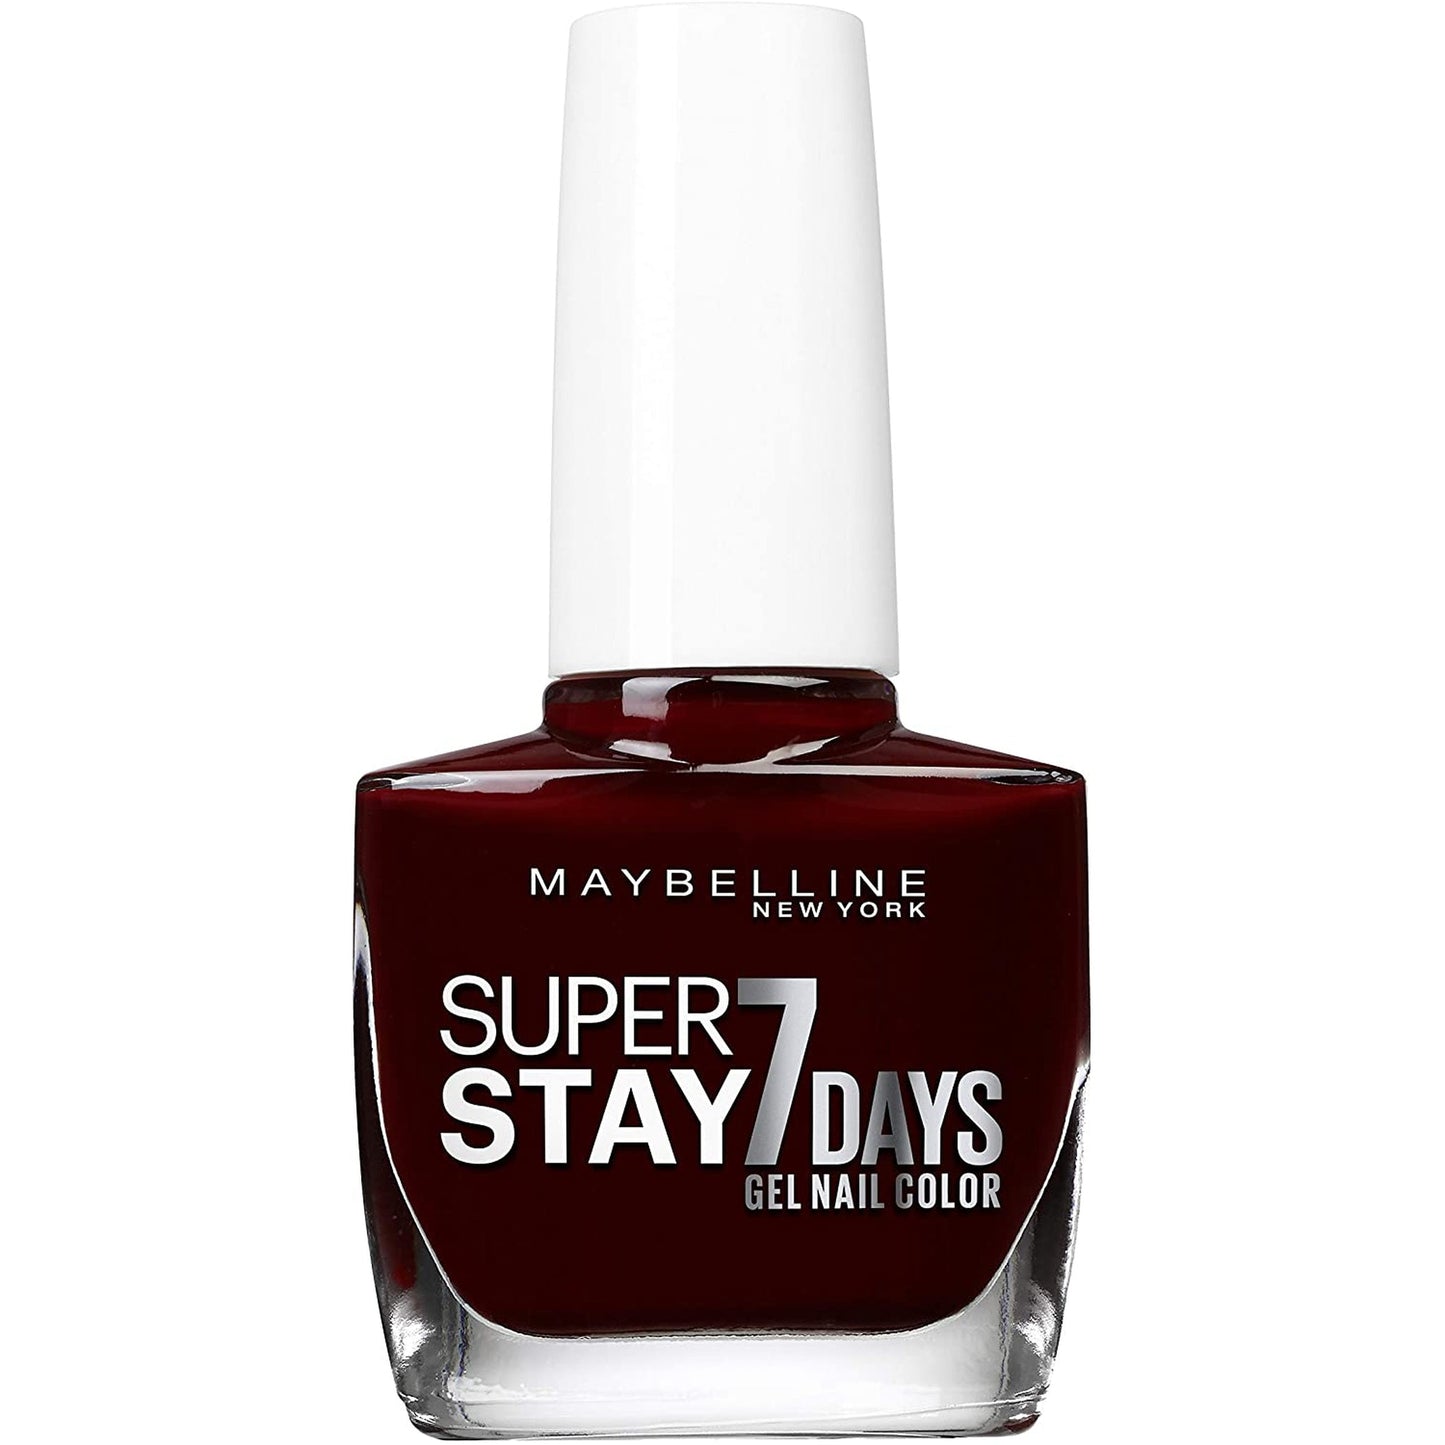 Maybelline Super Stay 7 Days Gel Nail Polish 287 Midnight Red-Maybelline-BeautyNmakeup.co.uk